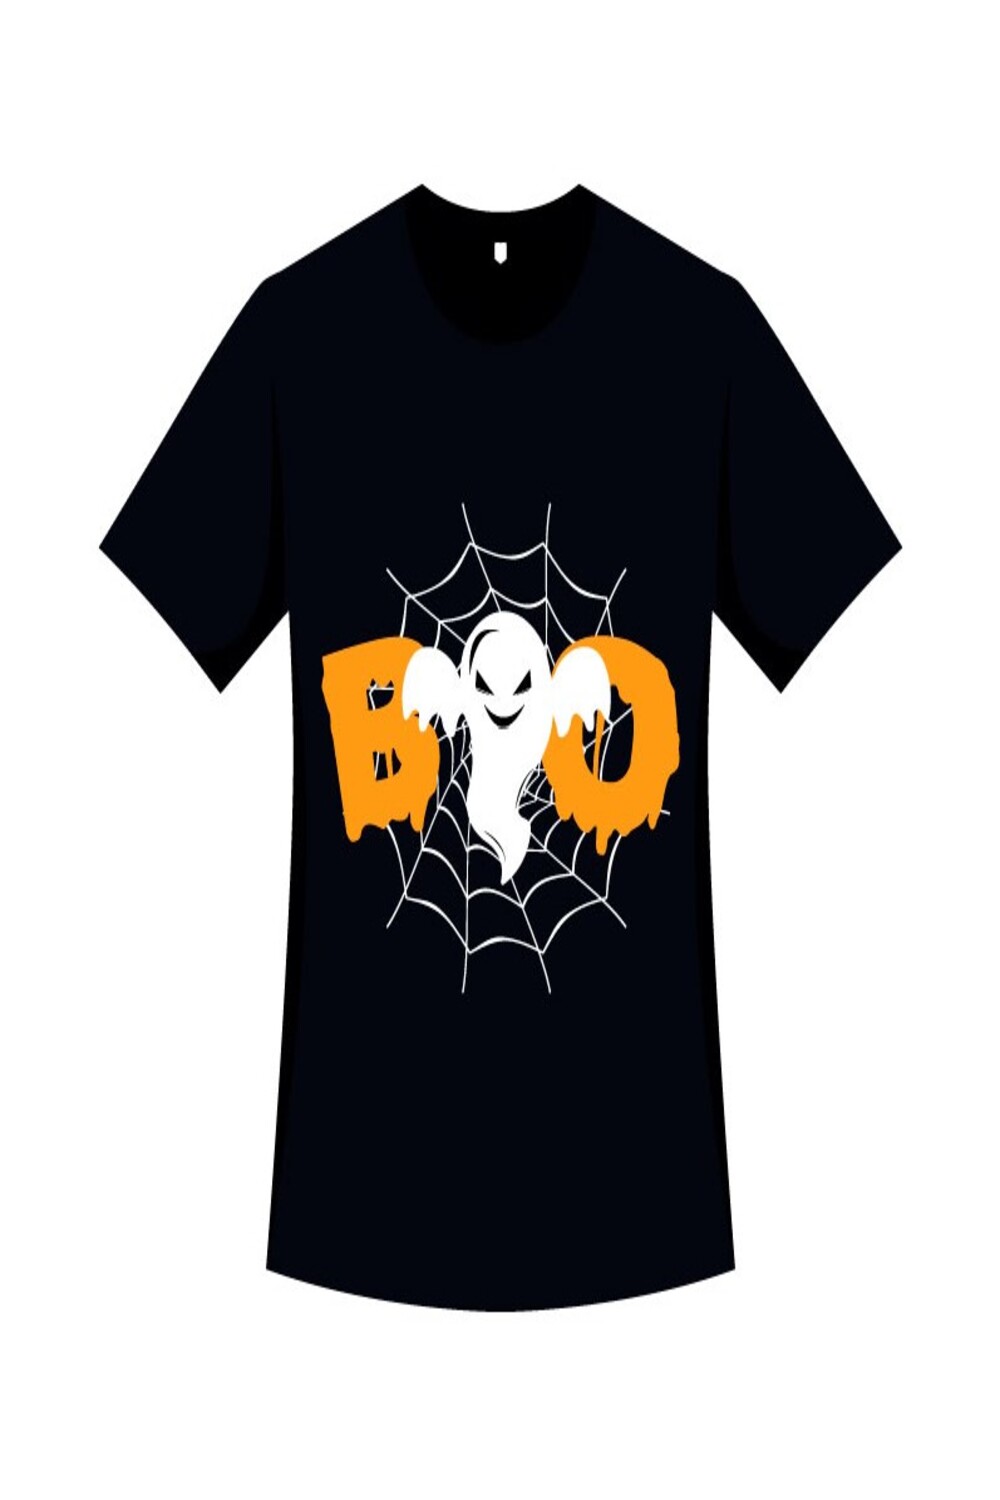 Black t-shirt with a cheerful white ghost on the background of a cobweb.